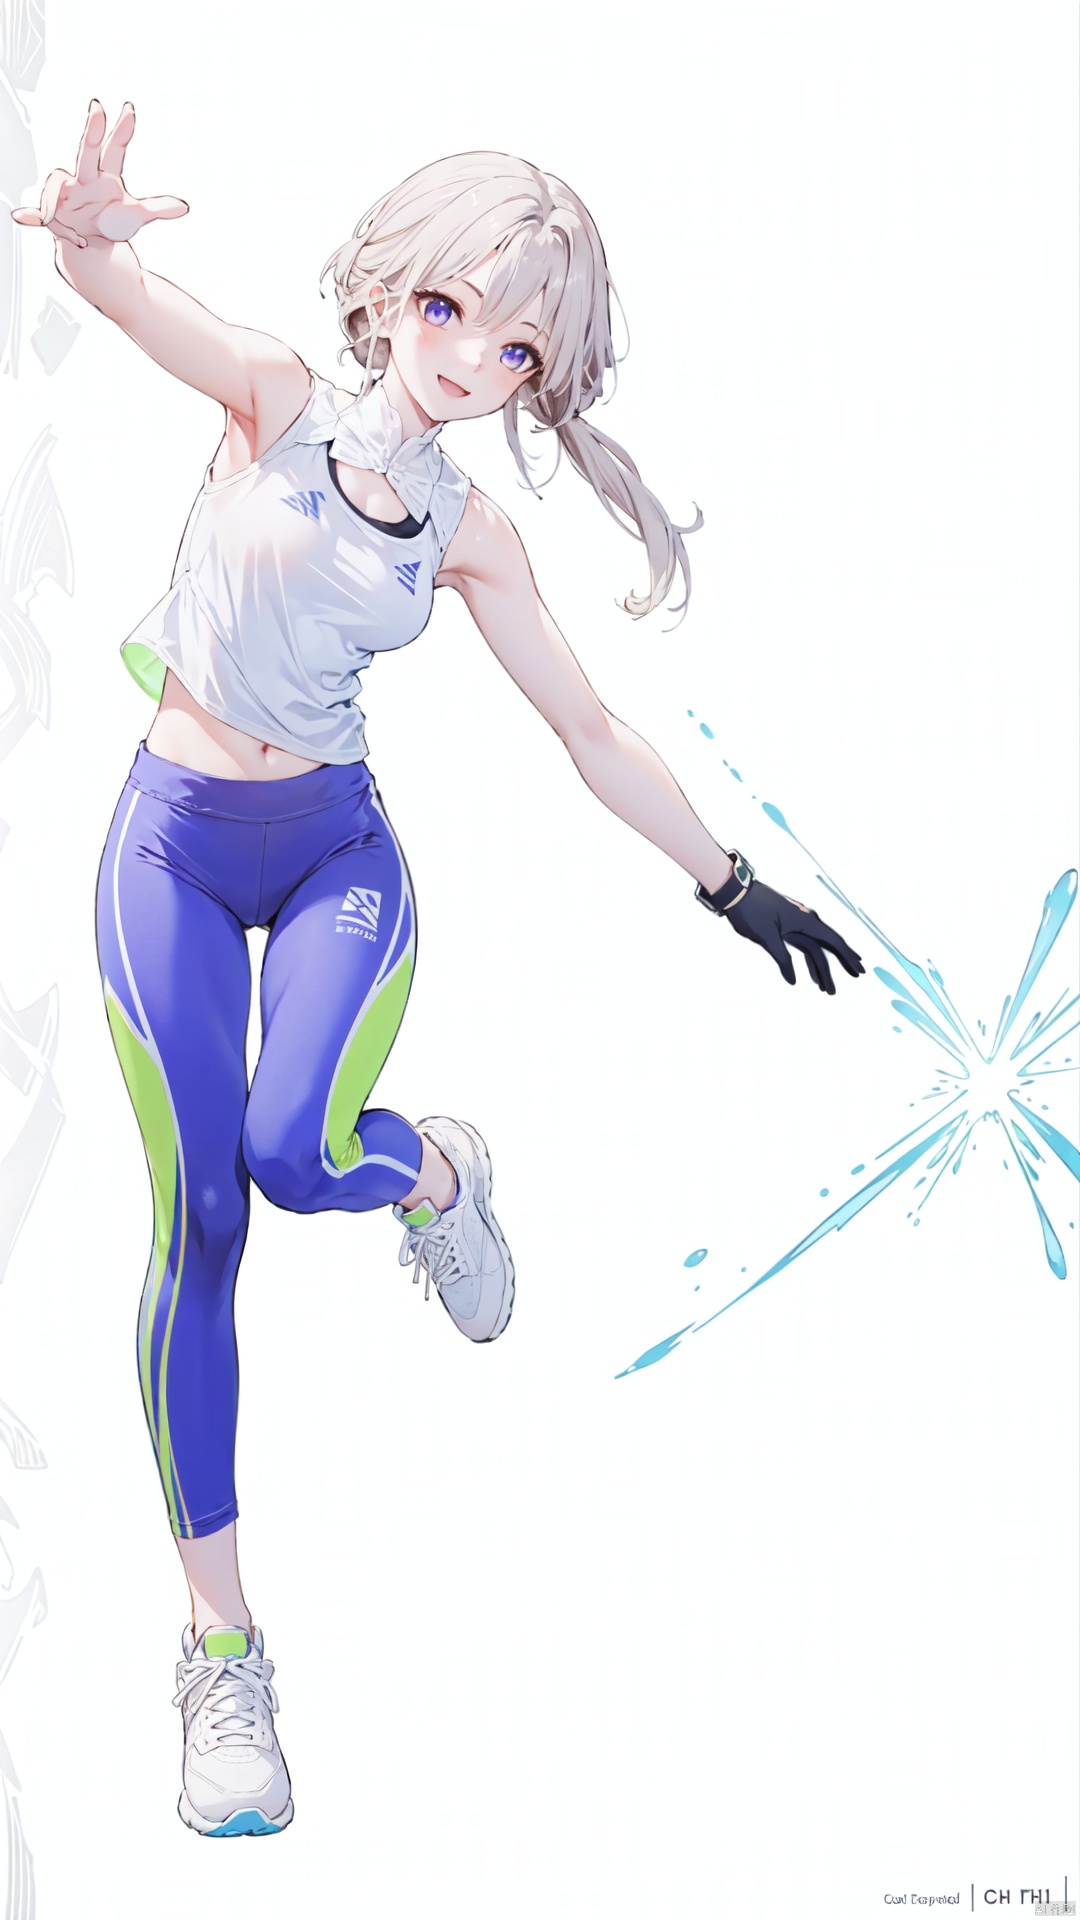  A full-body shot of a vibrant young girl in stylish activewear against a pristine white background, striking an energetic pose. She's wearing a sleek white sports **** top with colorful striped leggings and white sneakers. Her arms are naturally open, one leg slightly bent as if she's about to take the first step in a run. Her golden hair gently sways with her movement, and her face beams with a radiant, sunny smile, exuding the sparkle of youth, high-resolution image, HD, full body, fitness fashion, active pose, dynamic, fresh, healthy lifestyle, professional photography, trending in sports illustration, by Charlie Bowater, Stanley Lau, crisp focus, solid white backdrop, energetic youth, by Jamie Jones, vibrant, life-like digital painting.
